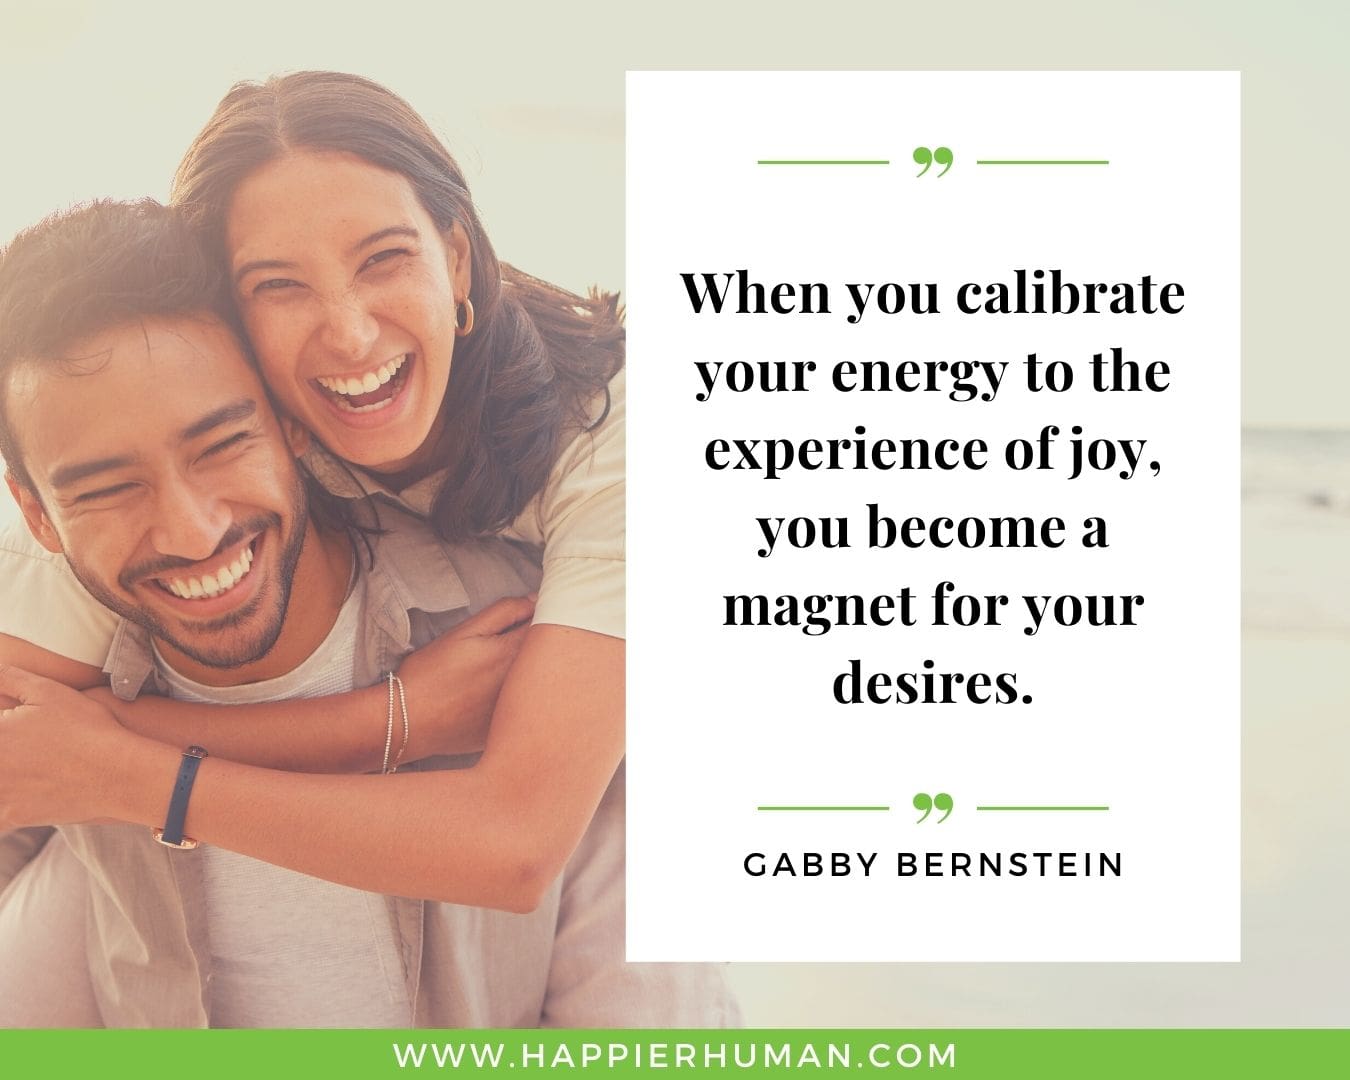 Positive Energy Quotes - “When you calibrate your energy to the experience of joy, you become a magnet for your desires.” - Gabby Bernstein